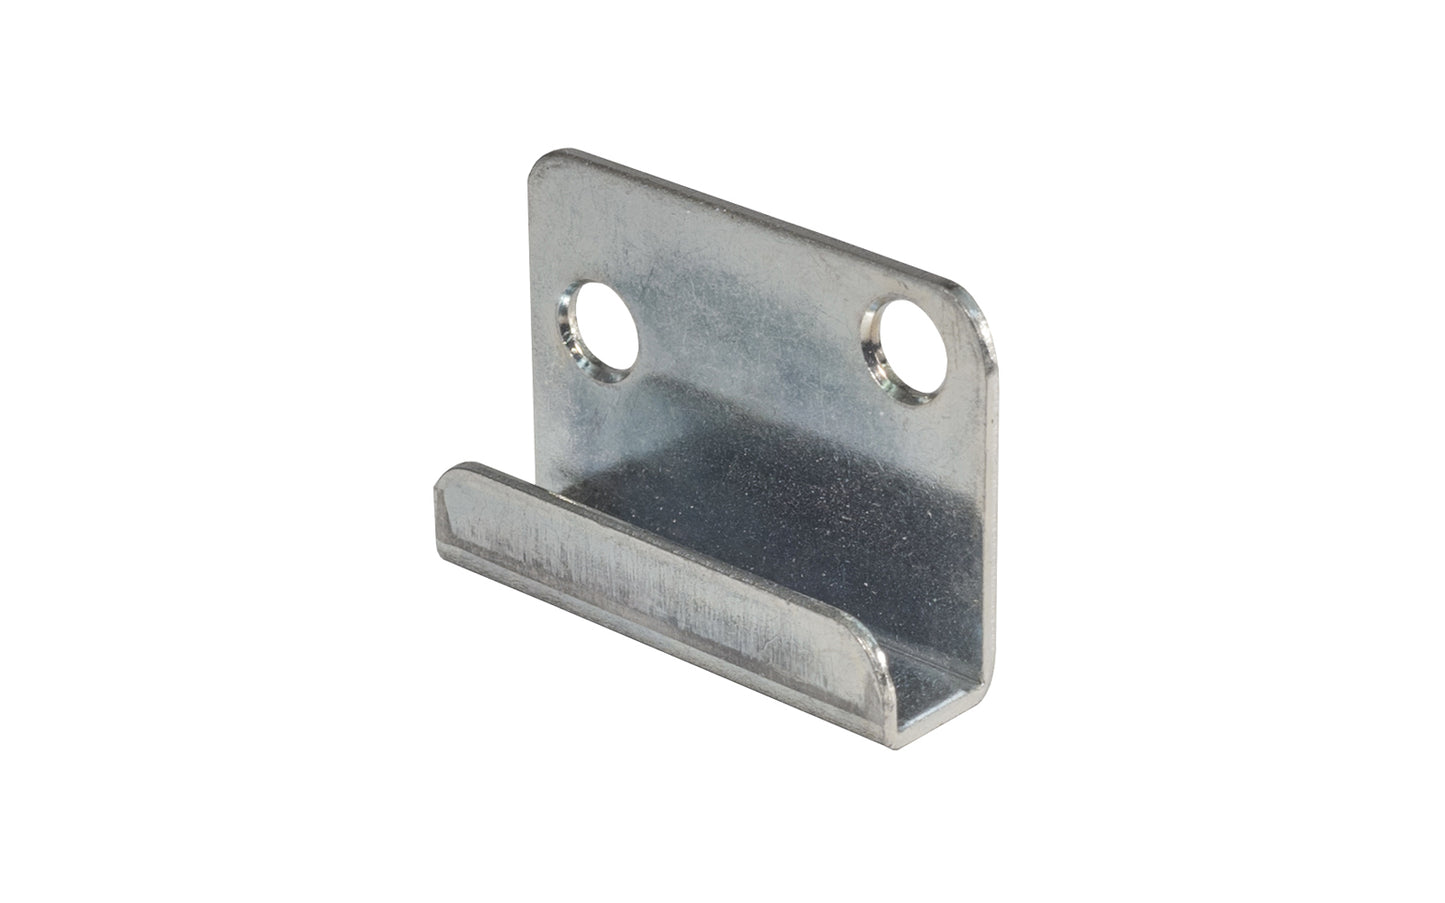 Steel Mirror Clip Support Hanger - 1/4" Opening ~ KV Model No. 277-ANO - Commonly used with installation of mirrors, but may also be used in appliacations where a 1/4" opening is needed - Knape and Vogt